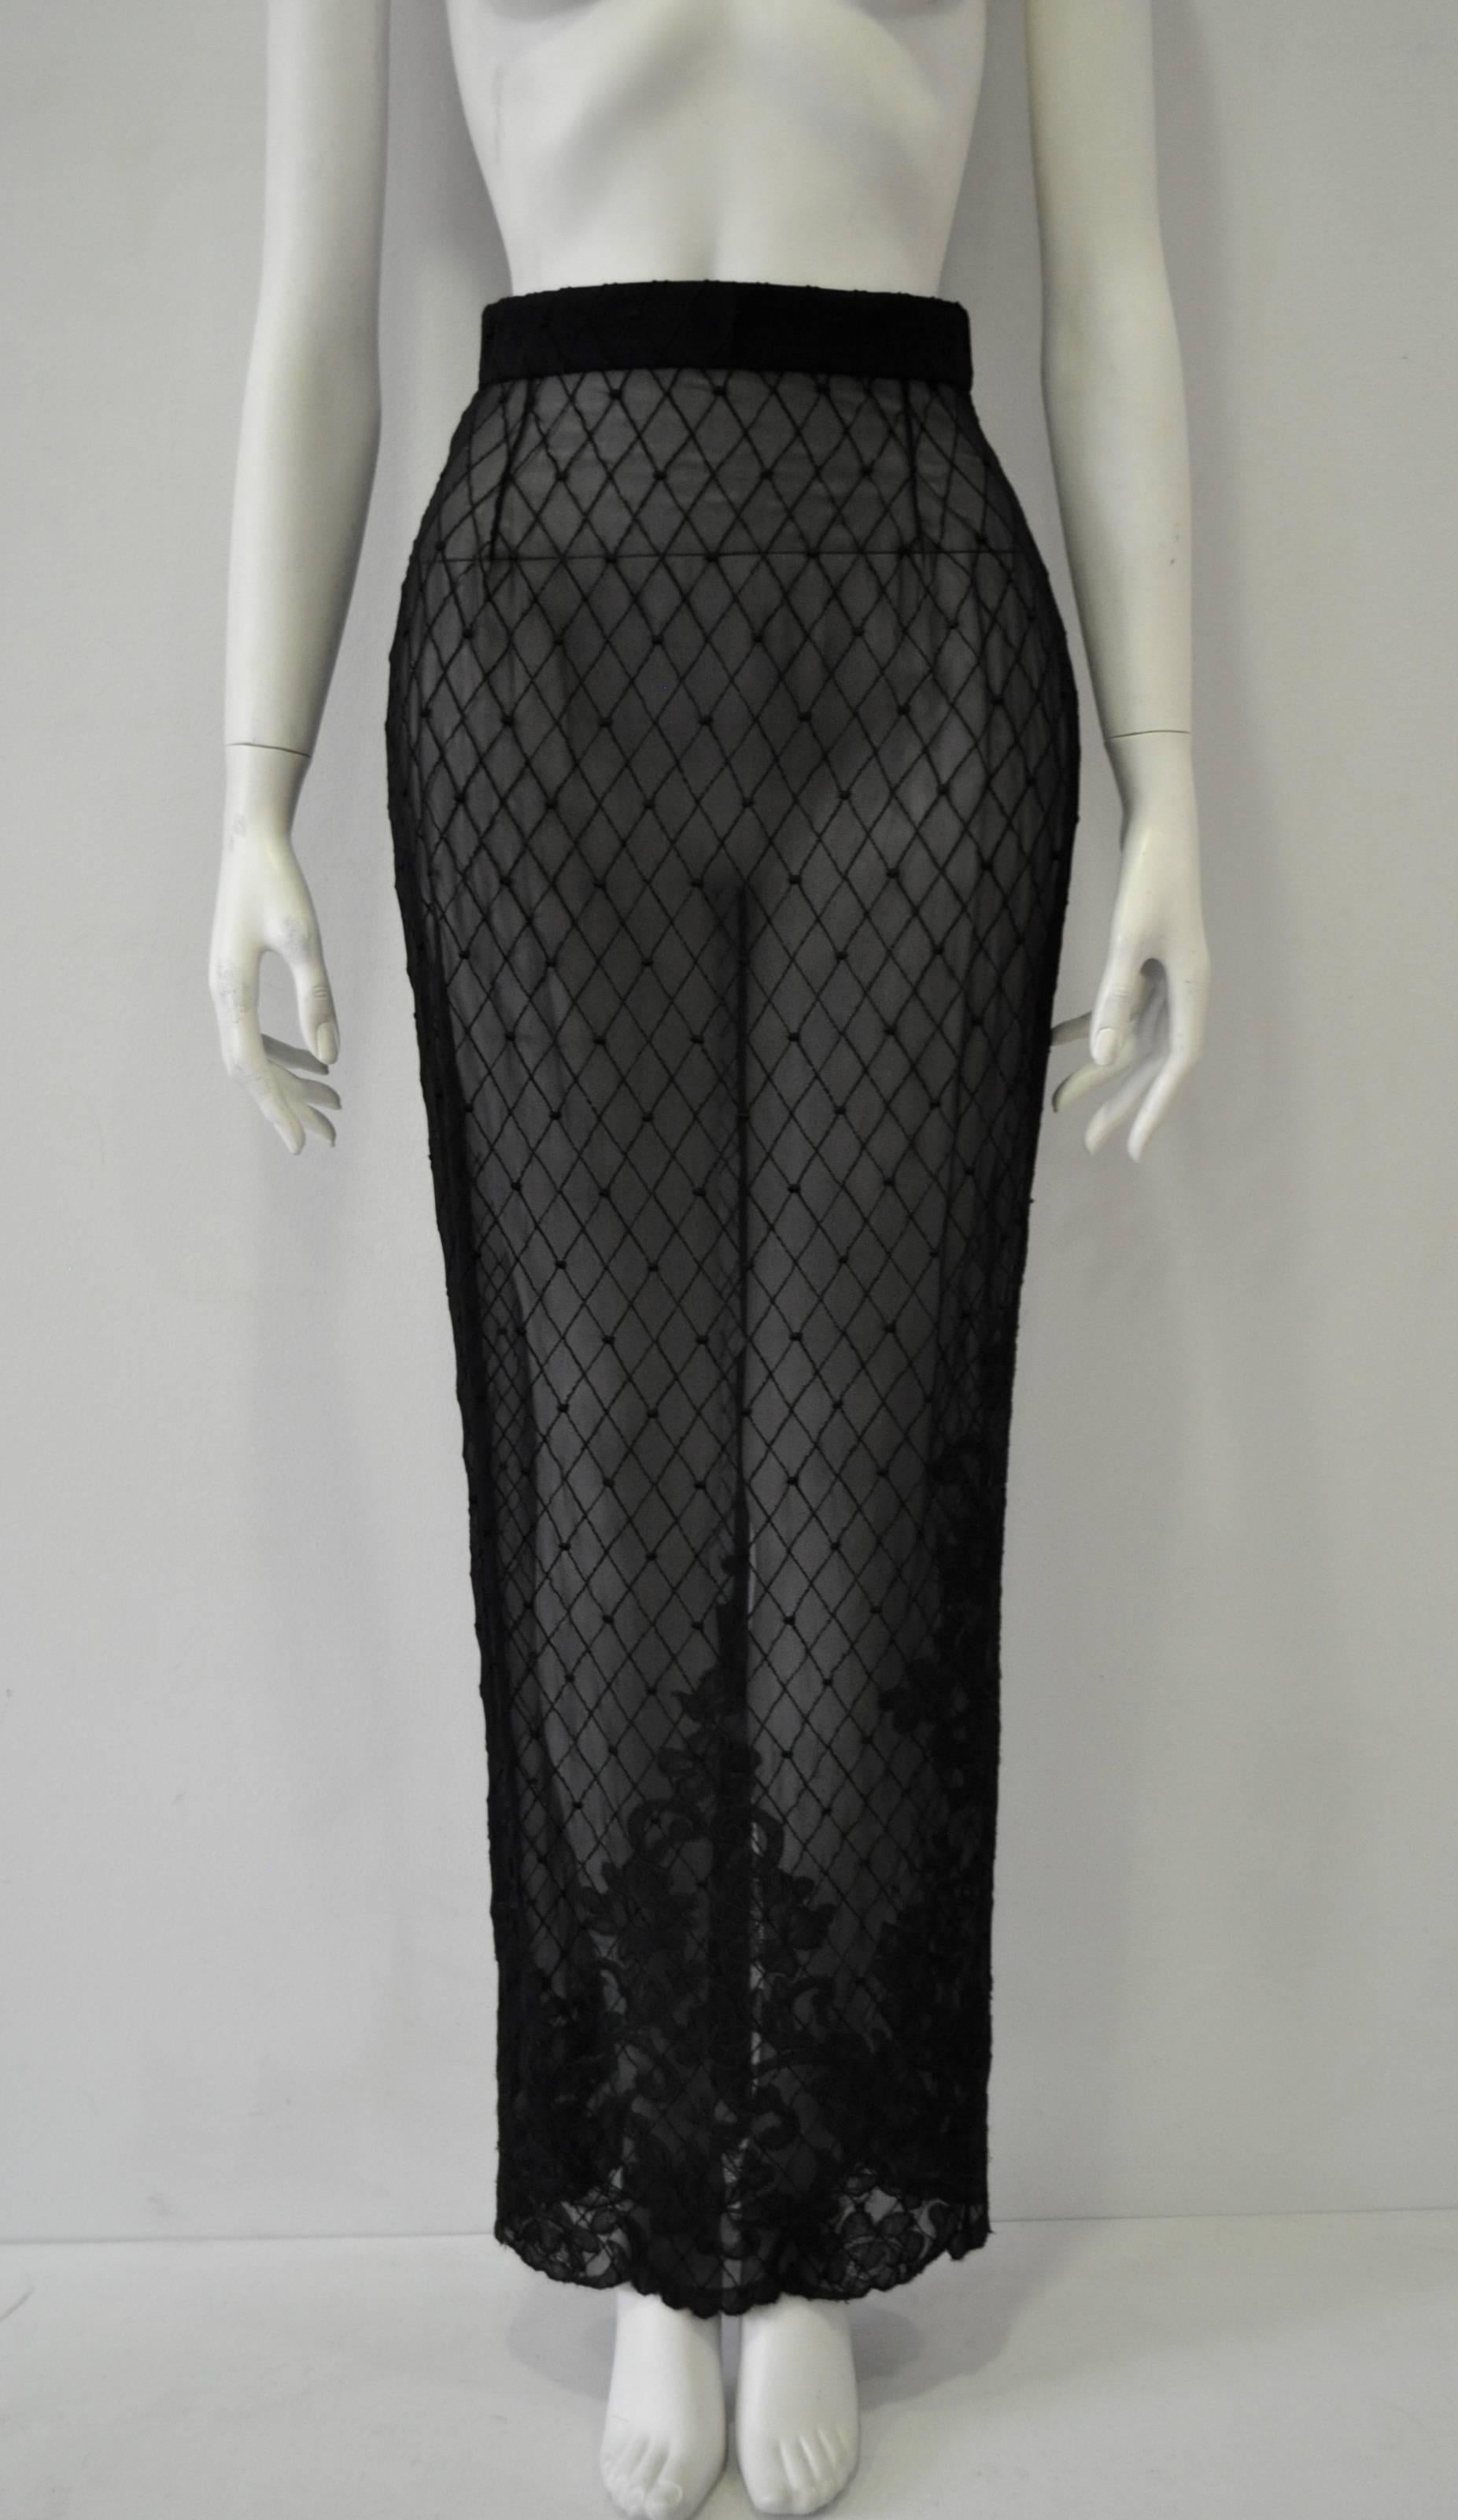 Sensational Gianni Versace Couture Netted Silk Sheath Floral Lace Hem Maxi Skirt With Sexy Back Slit